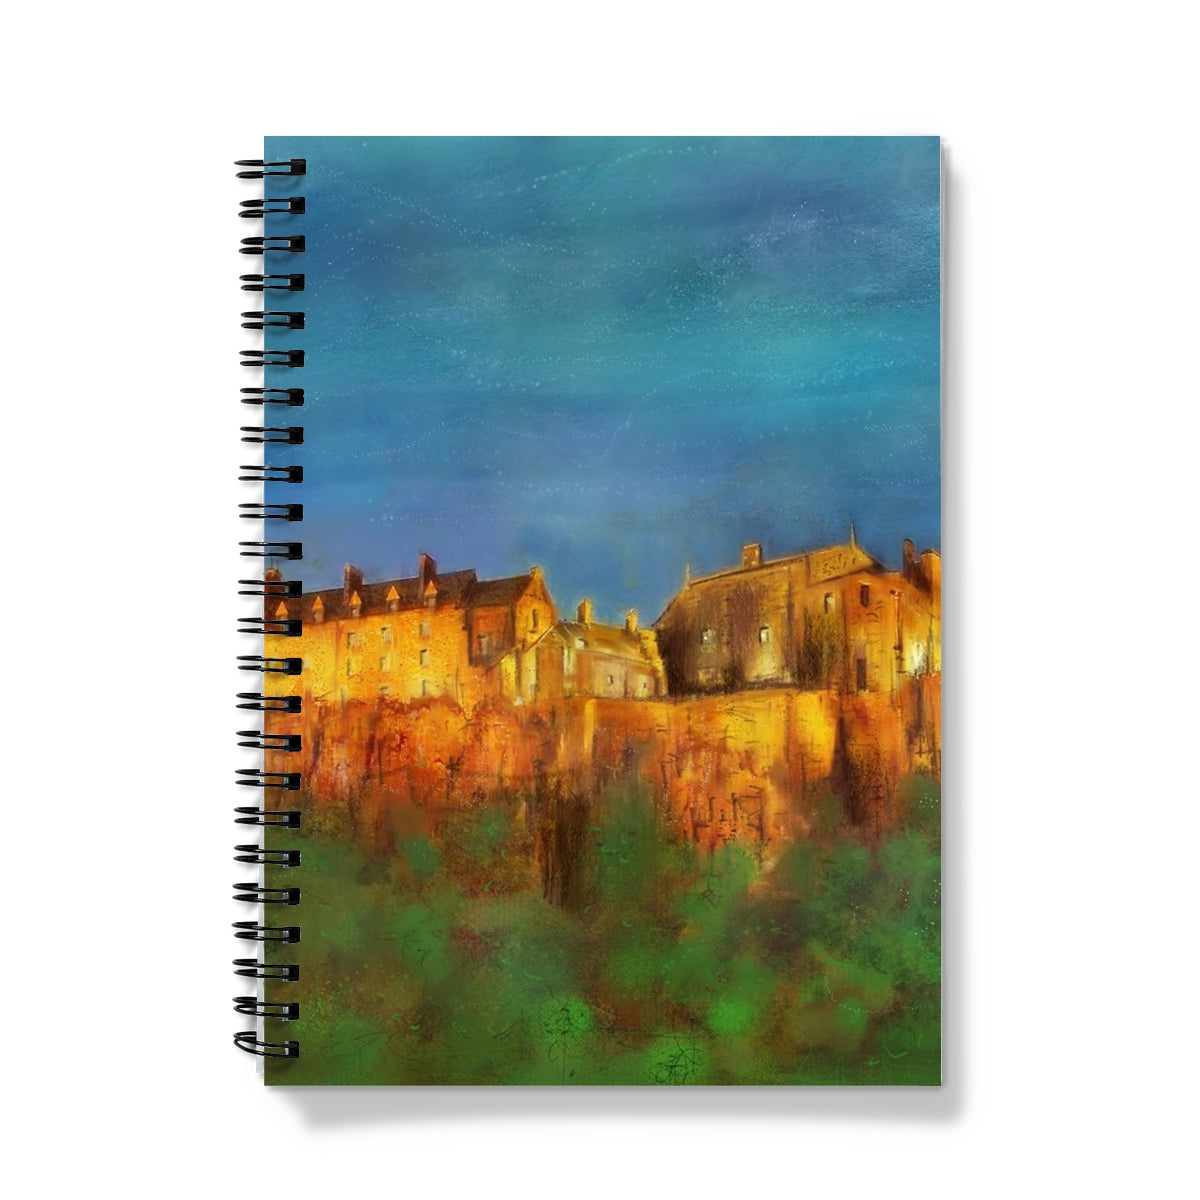 Stirling Castle Art Gifts Notebook-Journals & Notebooks-Historic & Iconic Scotland Art Gallery-A5-Lined-Paintings, Prints, Homeware, Art Gifts From Scotland By Scottish Artist Kevin Hunter